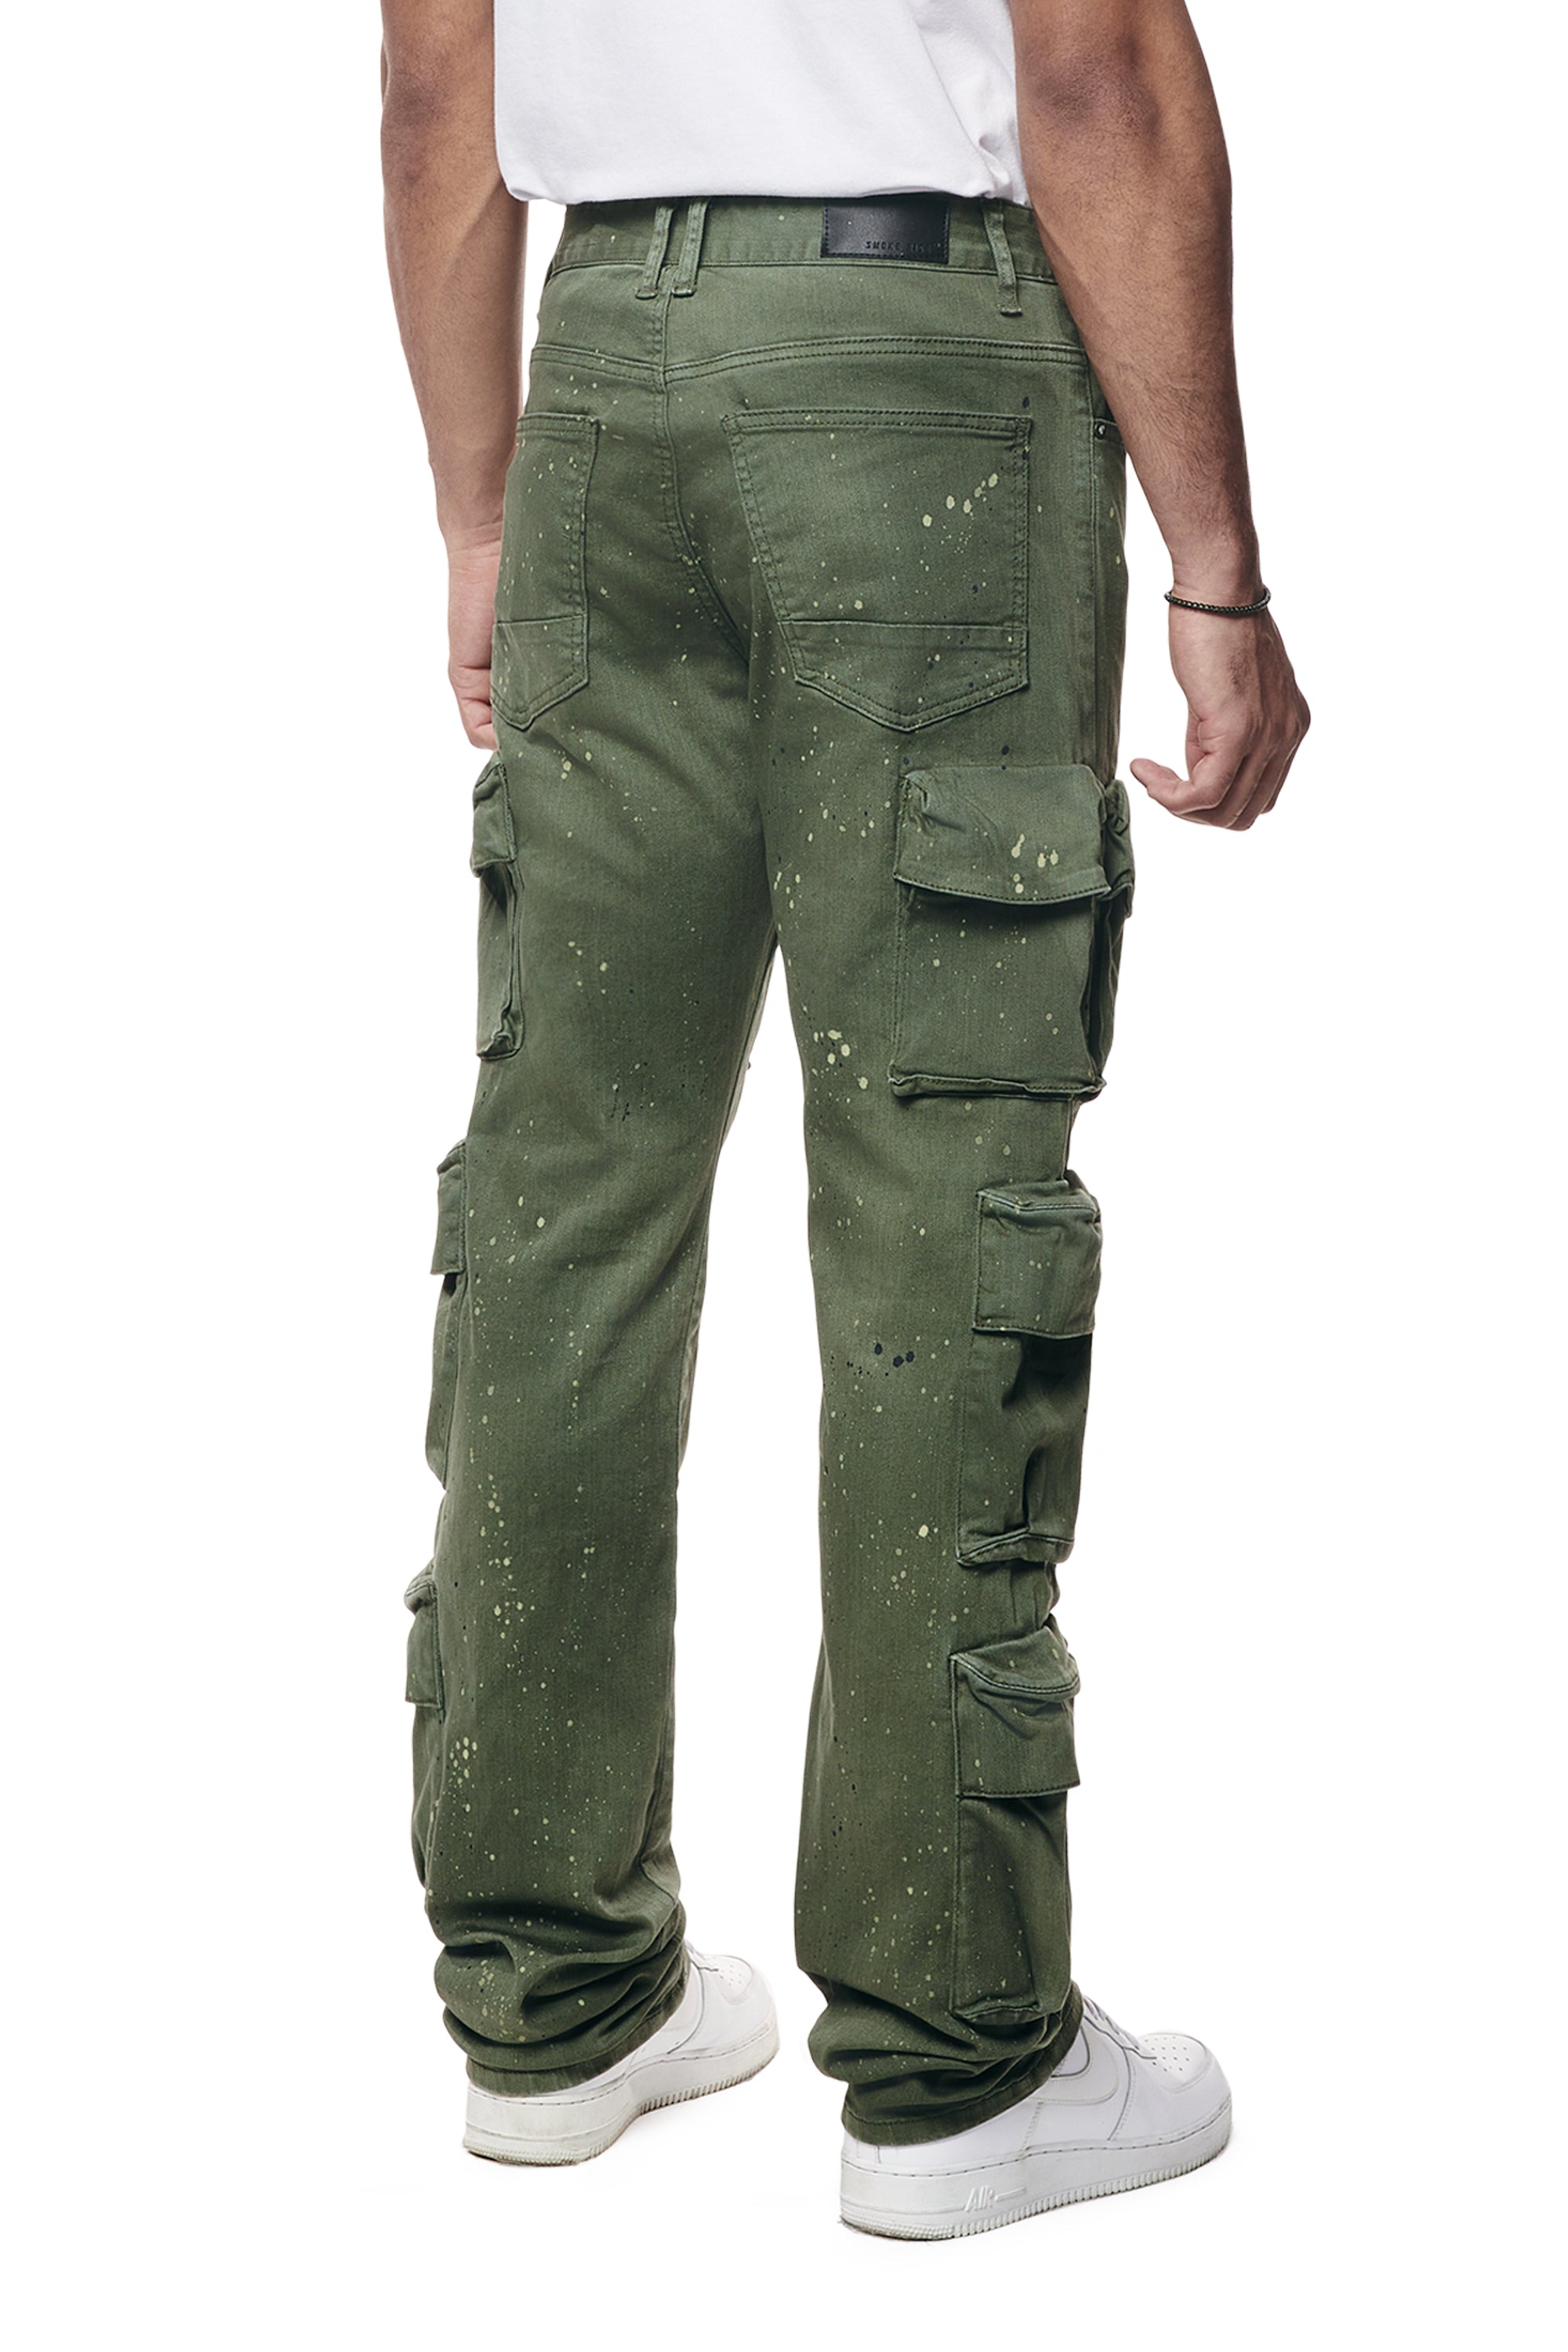 Airbrushed & Heavy Splattered Twill Pants - Vintage Army